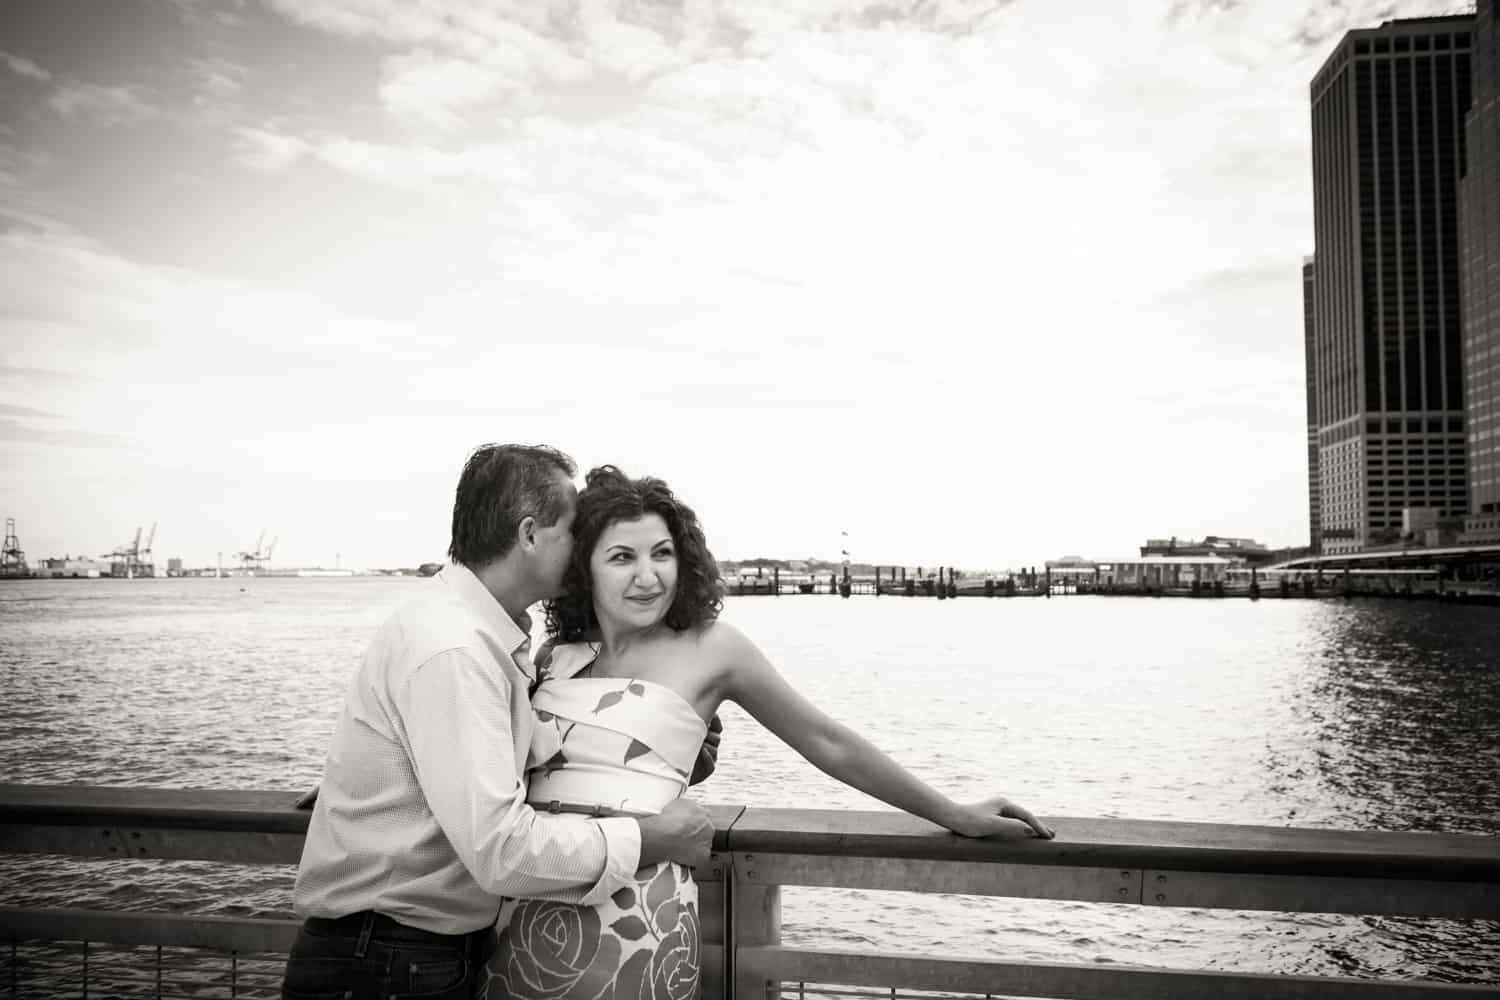 Black and white photo of man kissing woman on railing beside water